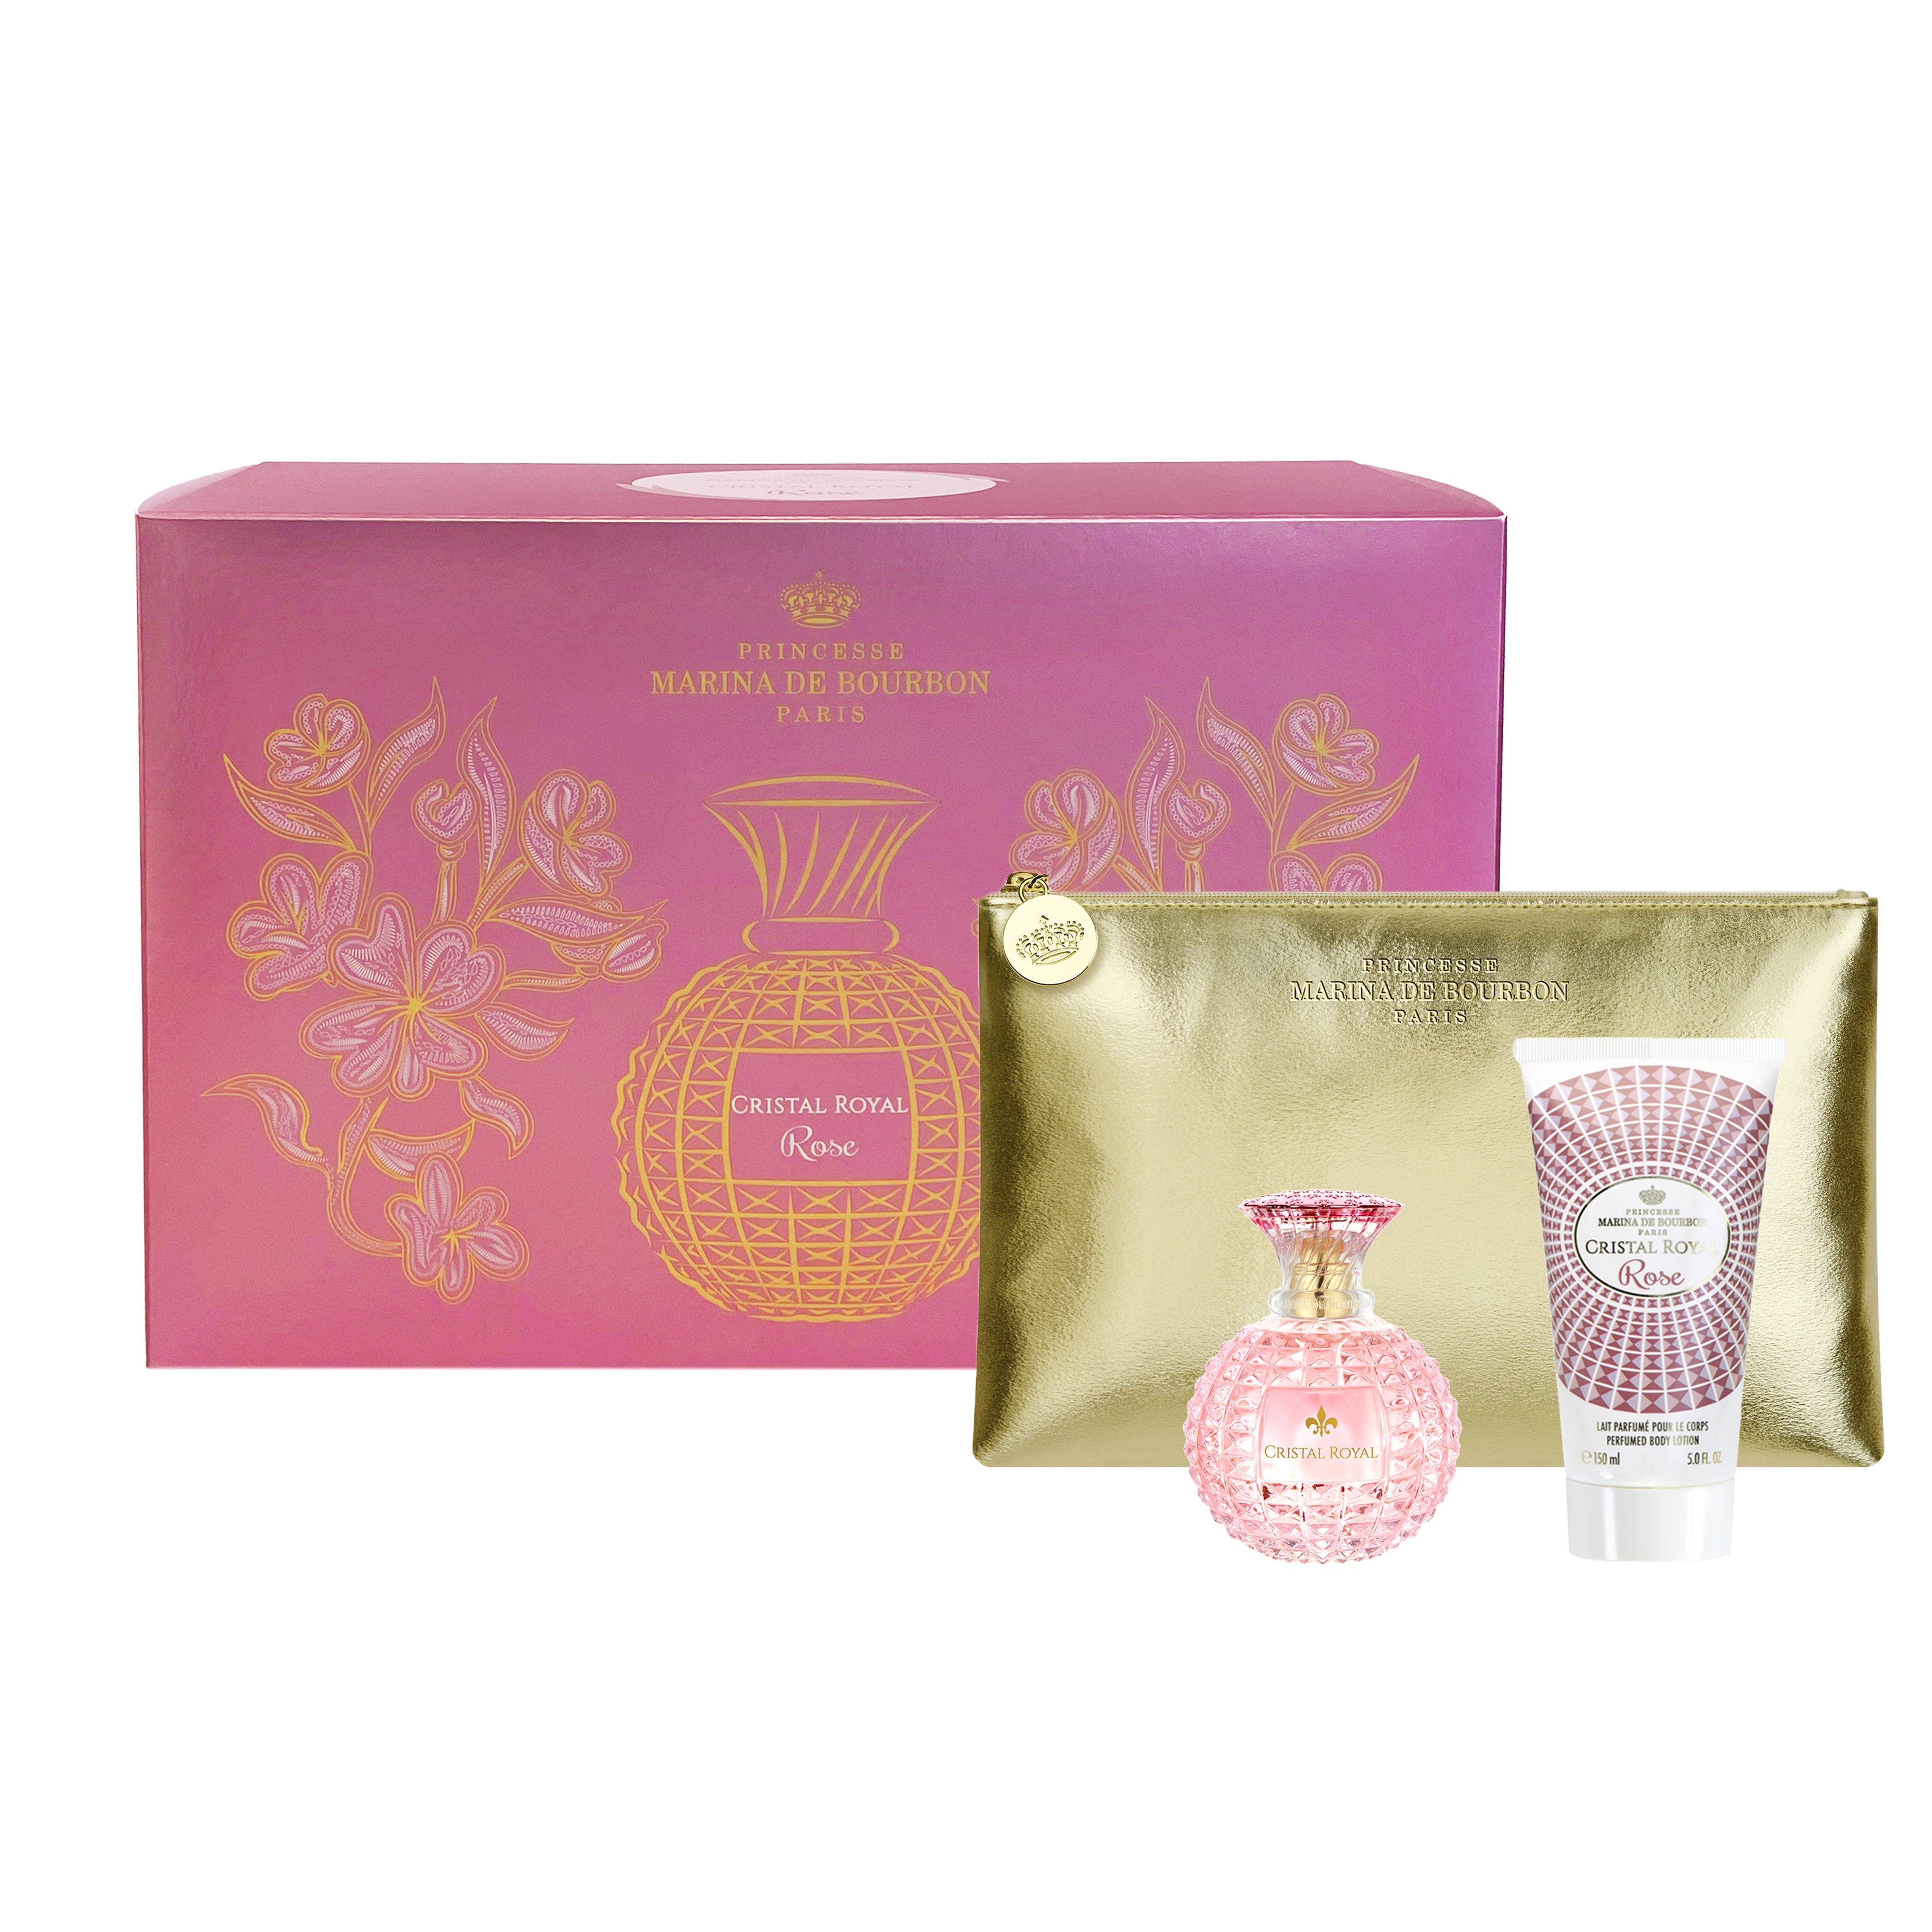 CRISTAL ROYAL ROSE 50ML Gift Set - A pouch and the perfumed body lotion offered